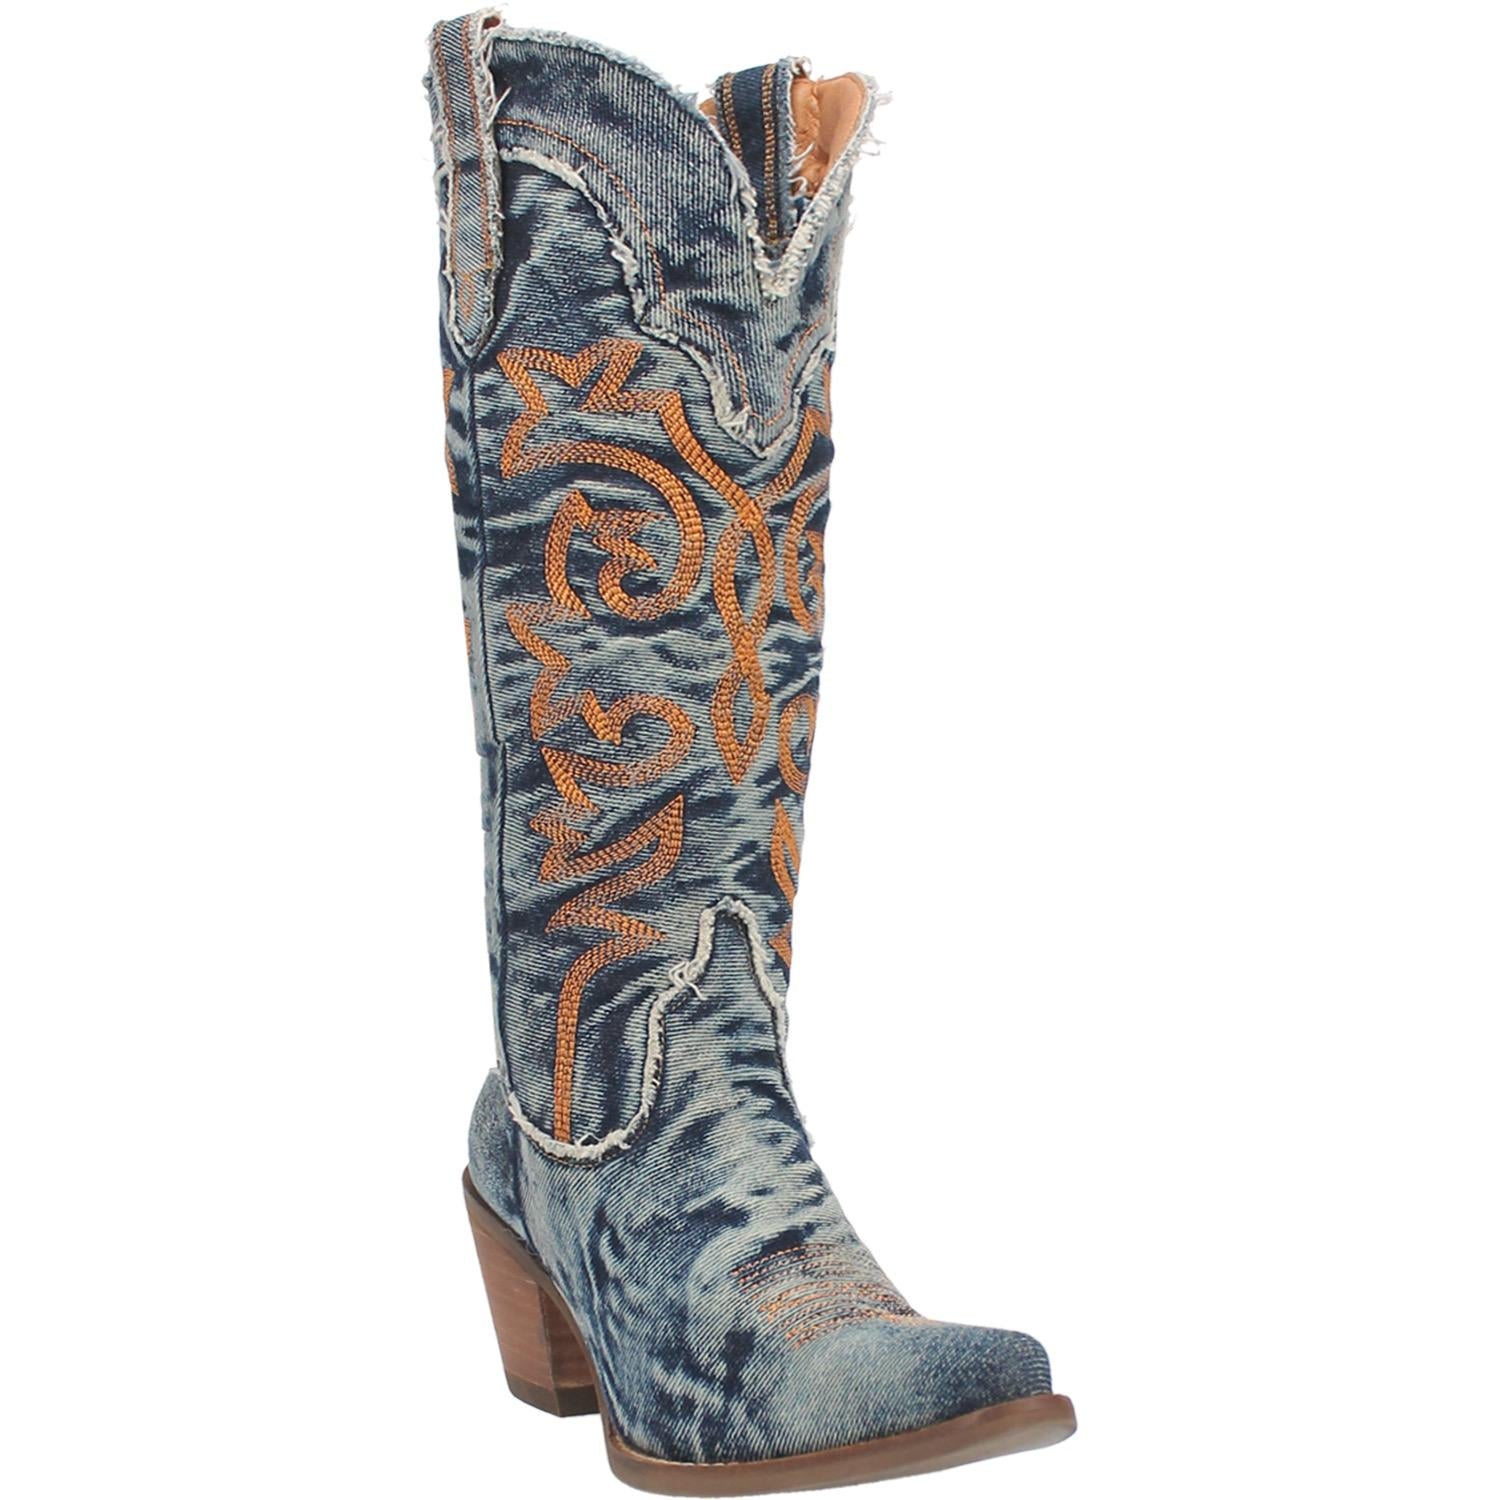 A mid calf length denim boot with a short heel, gold stitch design across the front, straps, and V cut at the top. Item is pictured on a white background.